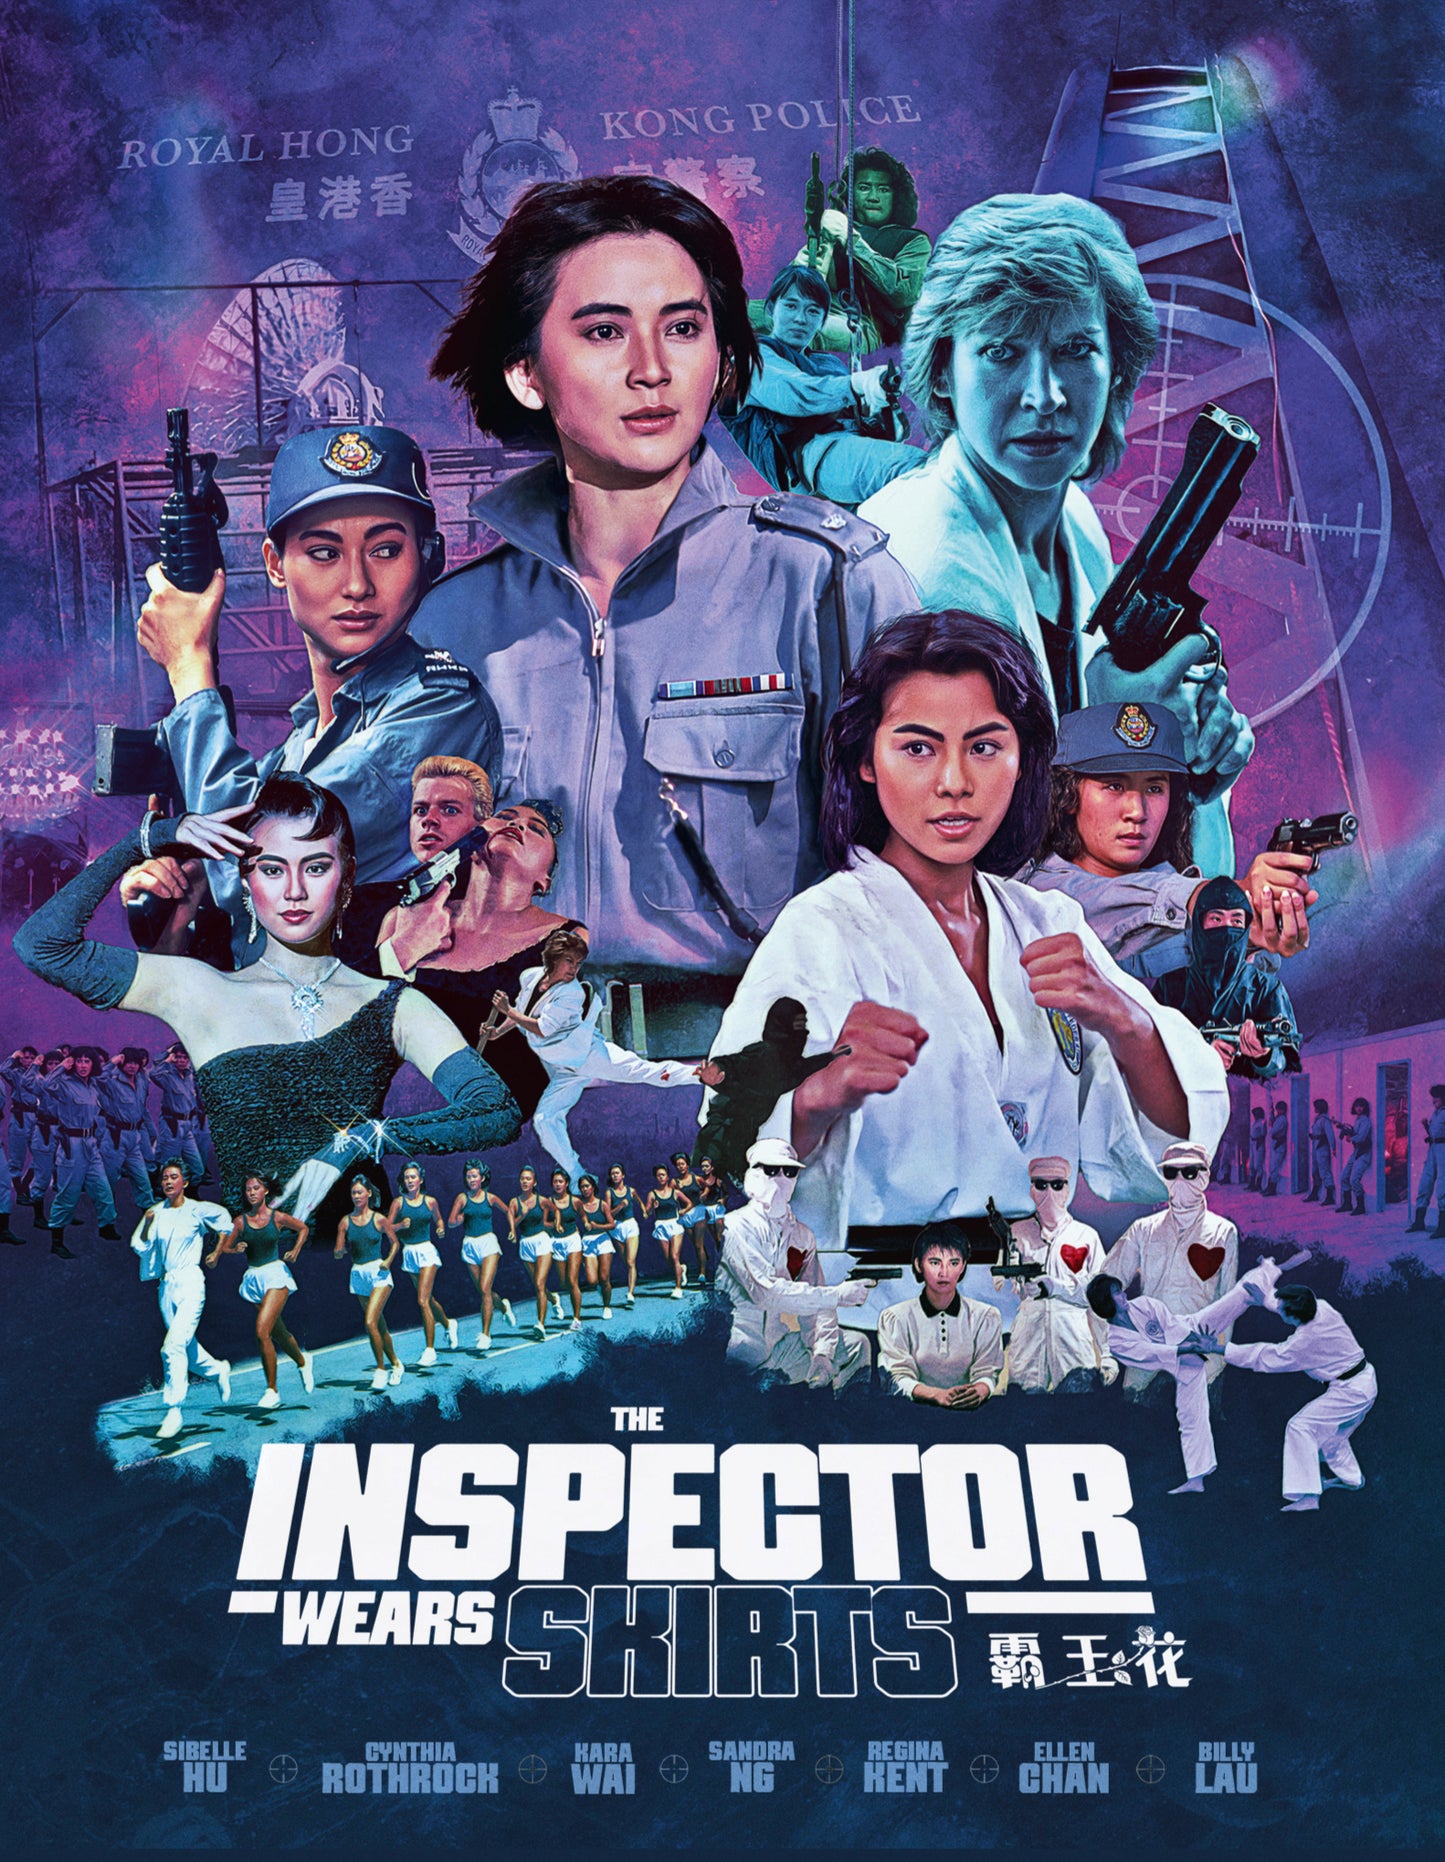 The Inspector Wears Skirts Blu-ray with Limited Edition Slipcover (88 Films U.S.)